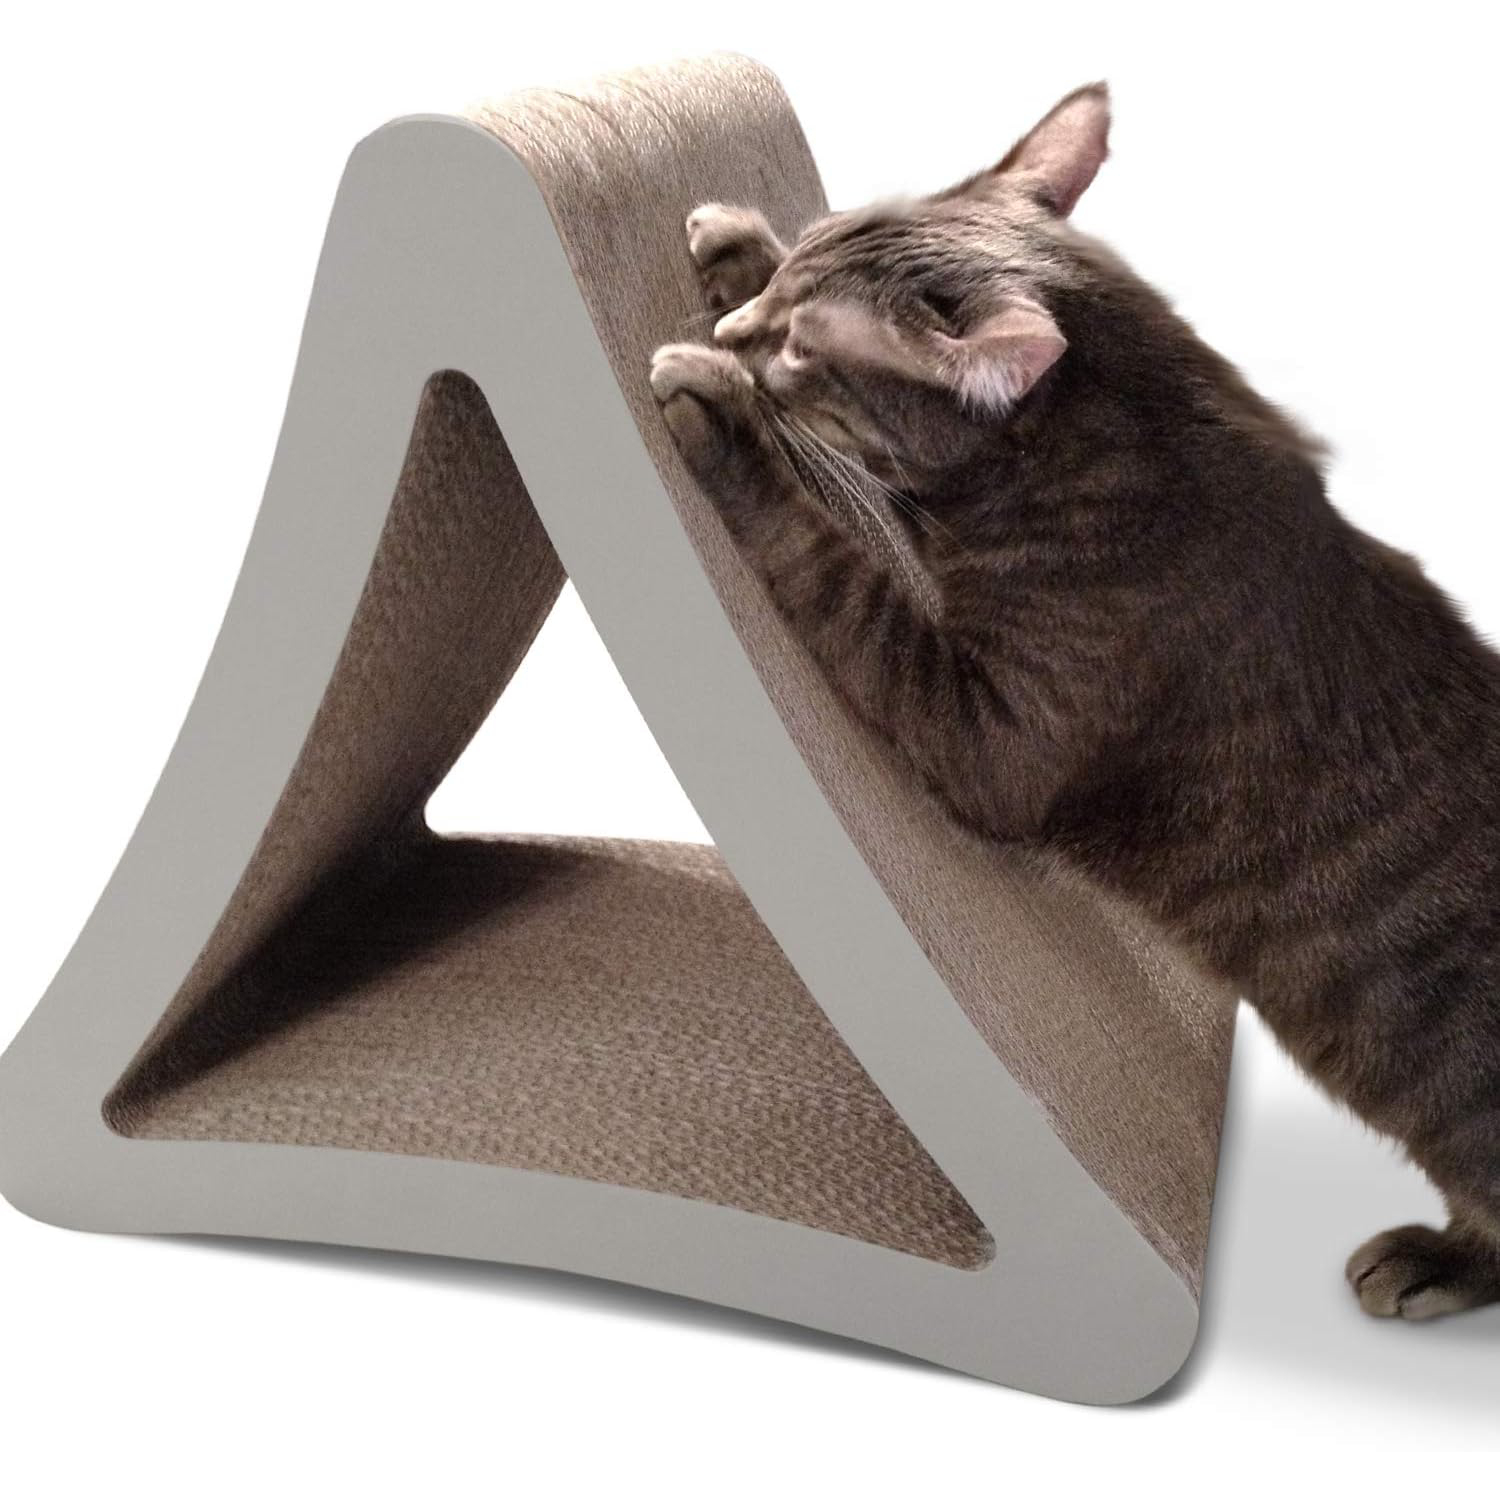 PetFusion 3-Sided Vertical Cat Scratching Post Multiple Angle Cat Scratching Pad Play & Perch Cat Scratching New